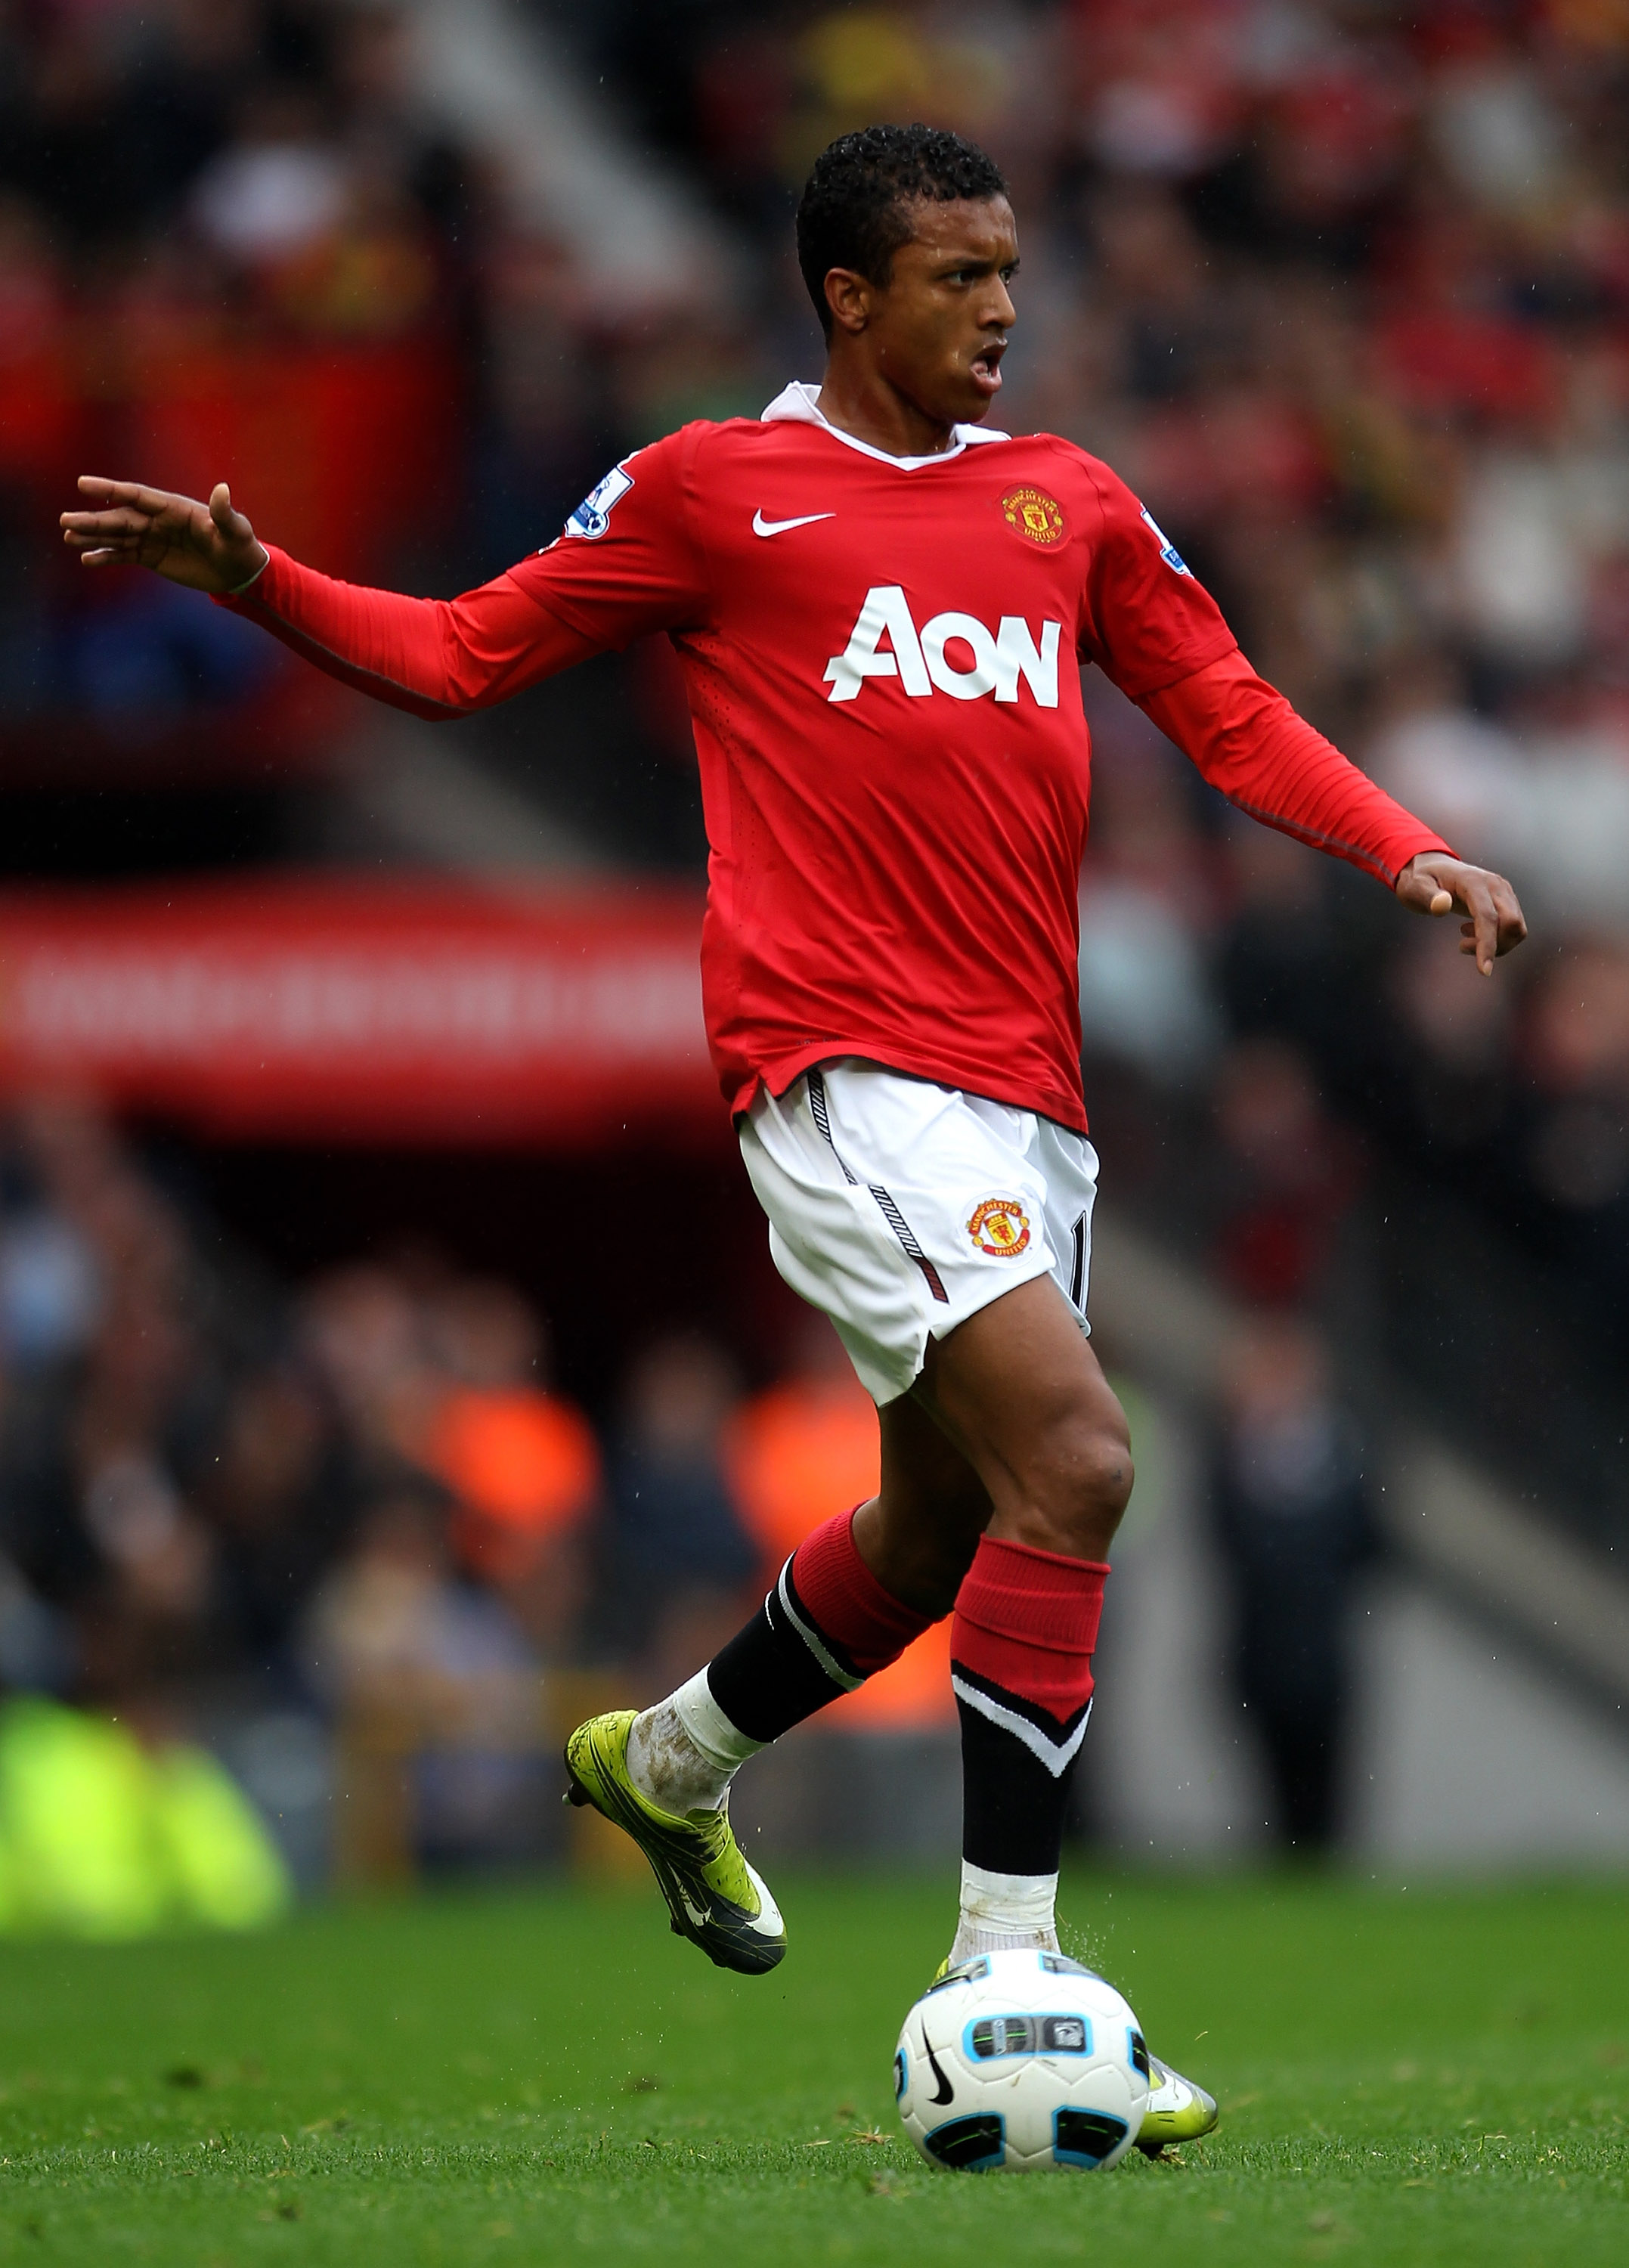 MANCHESTER, ENGLAND - SEPTEMBER 19:  Nani of Manchester United in action during the Barclays Premier League match between Manchester United and Liverpool at Old Trafford on September 19, 2010 in Manchester, England.  (Photo by Alex Livesey/Getty Images)